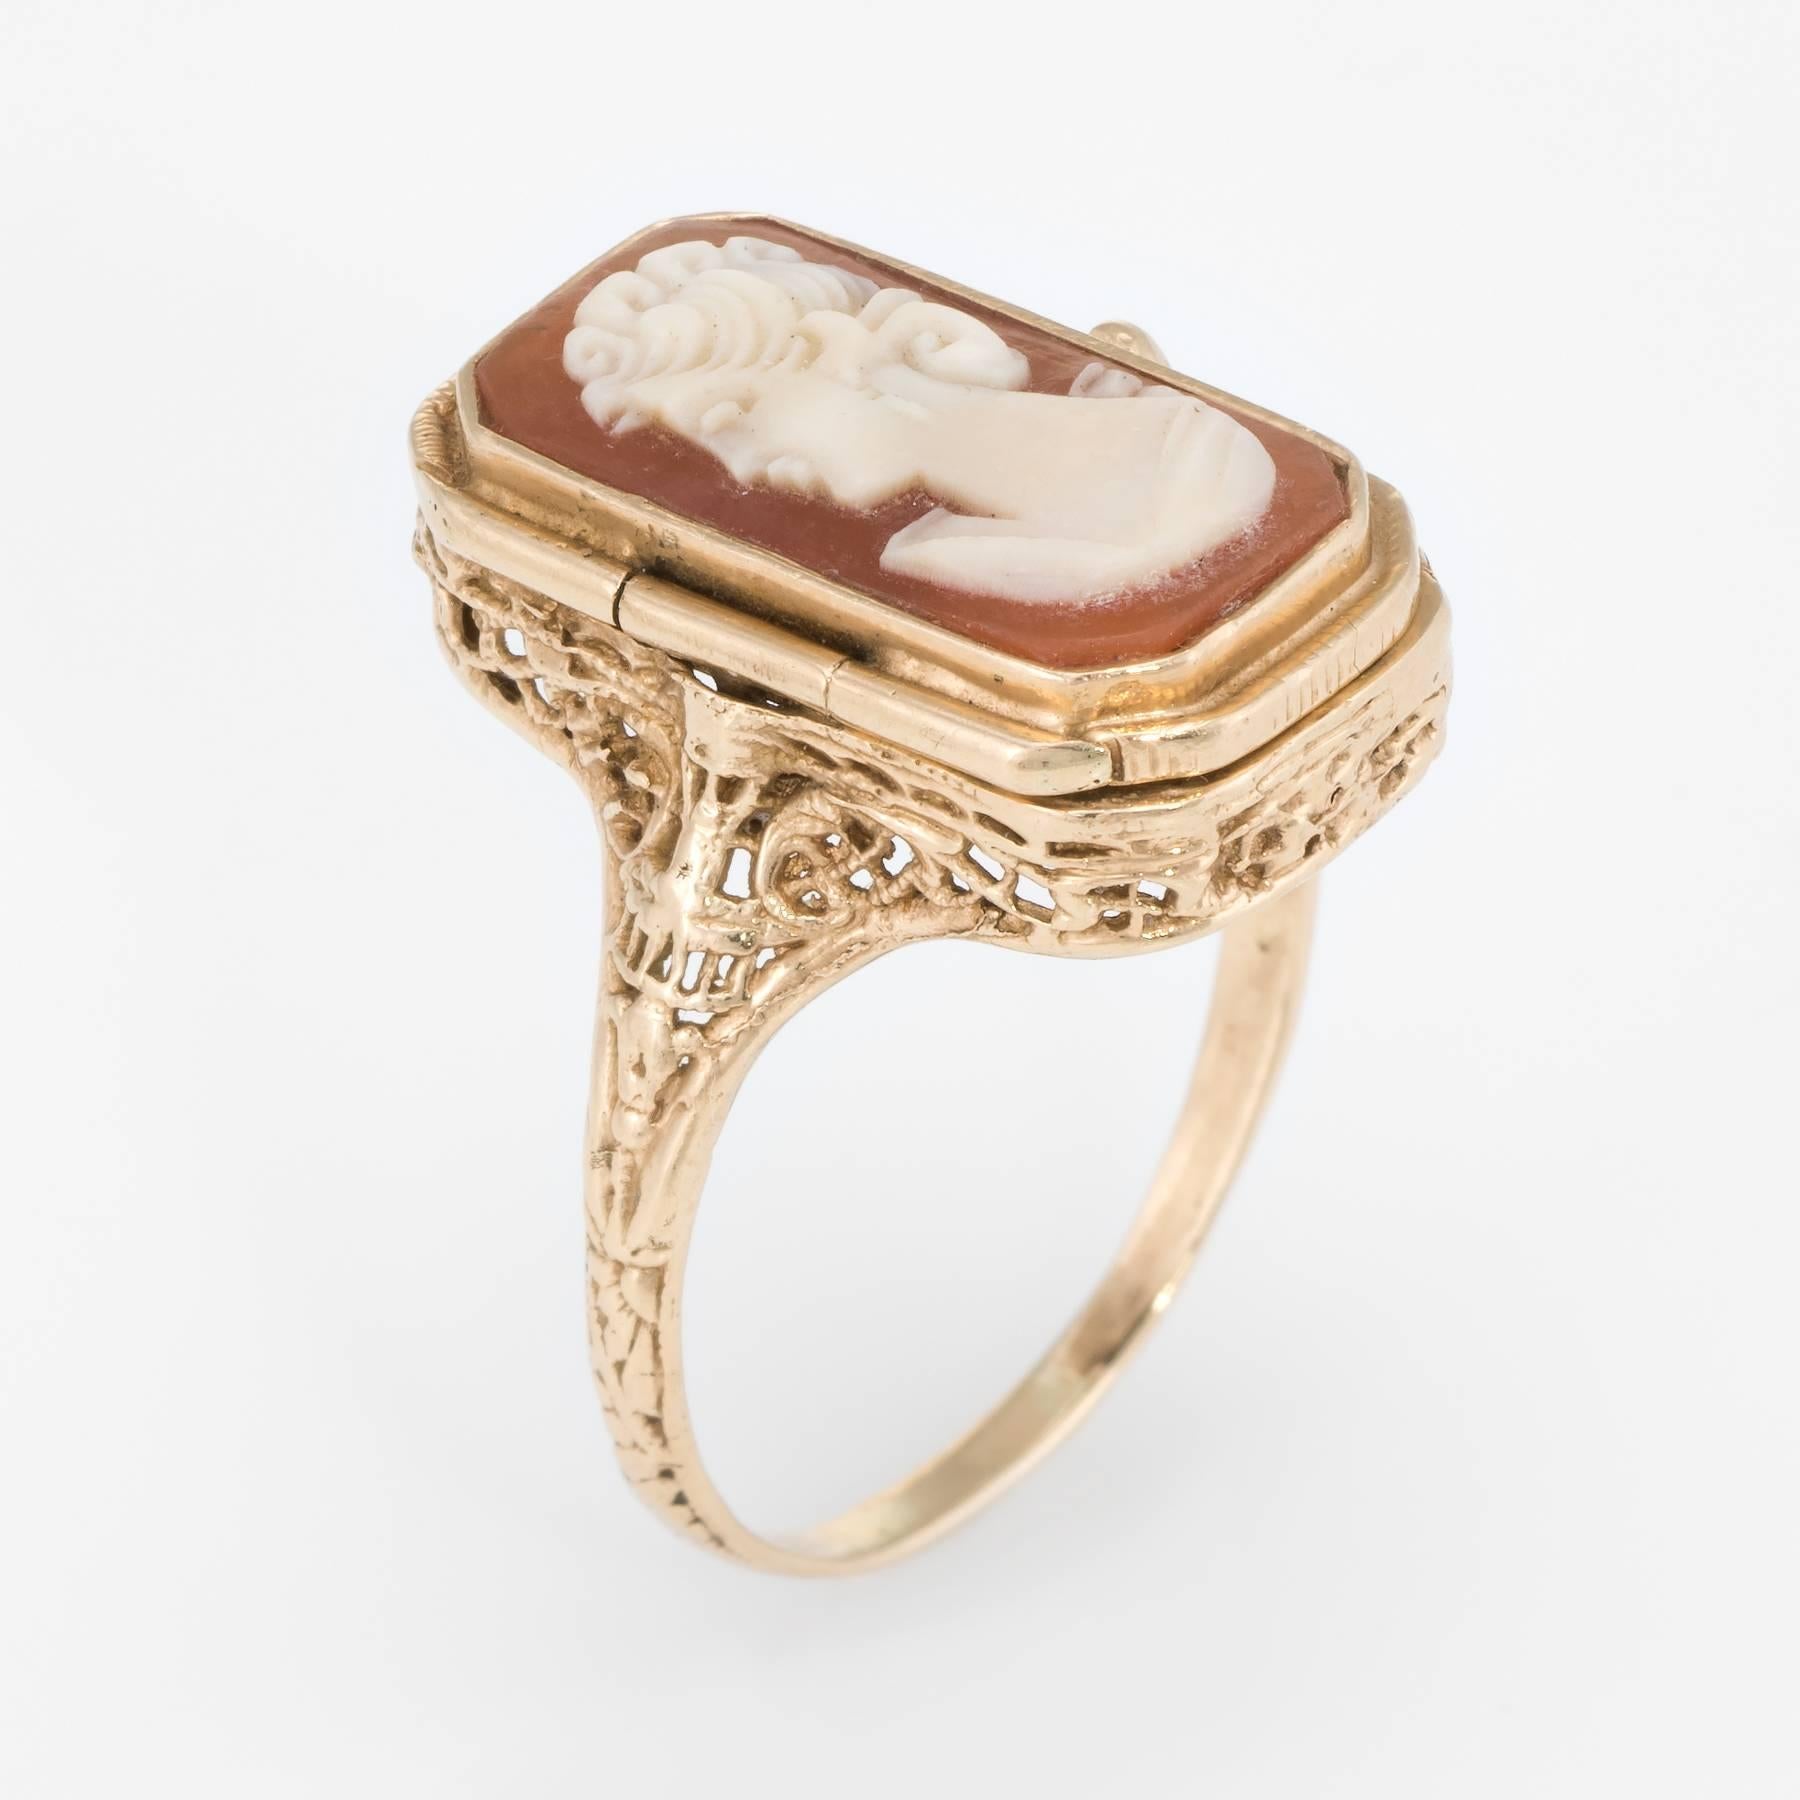 Finely detailed vintage flip cocktail ring, crafted in 14 karat yellow gold. 

Carved shell cameo depicting the side profile of a woman measures 18mm x 10mm. The onyx also measures 18mm x 10mm. The cameo & onyx are in excellent condition and free of